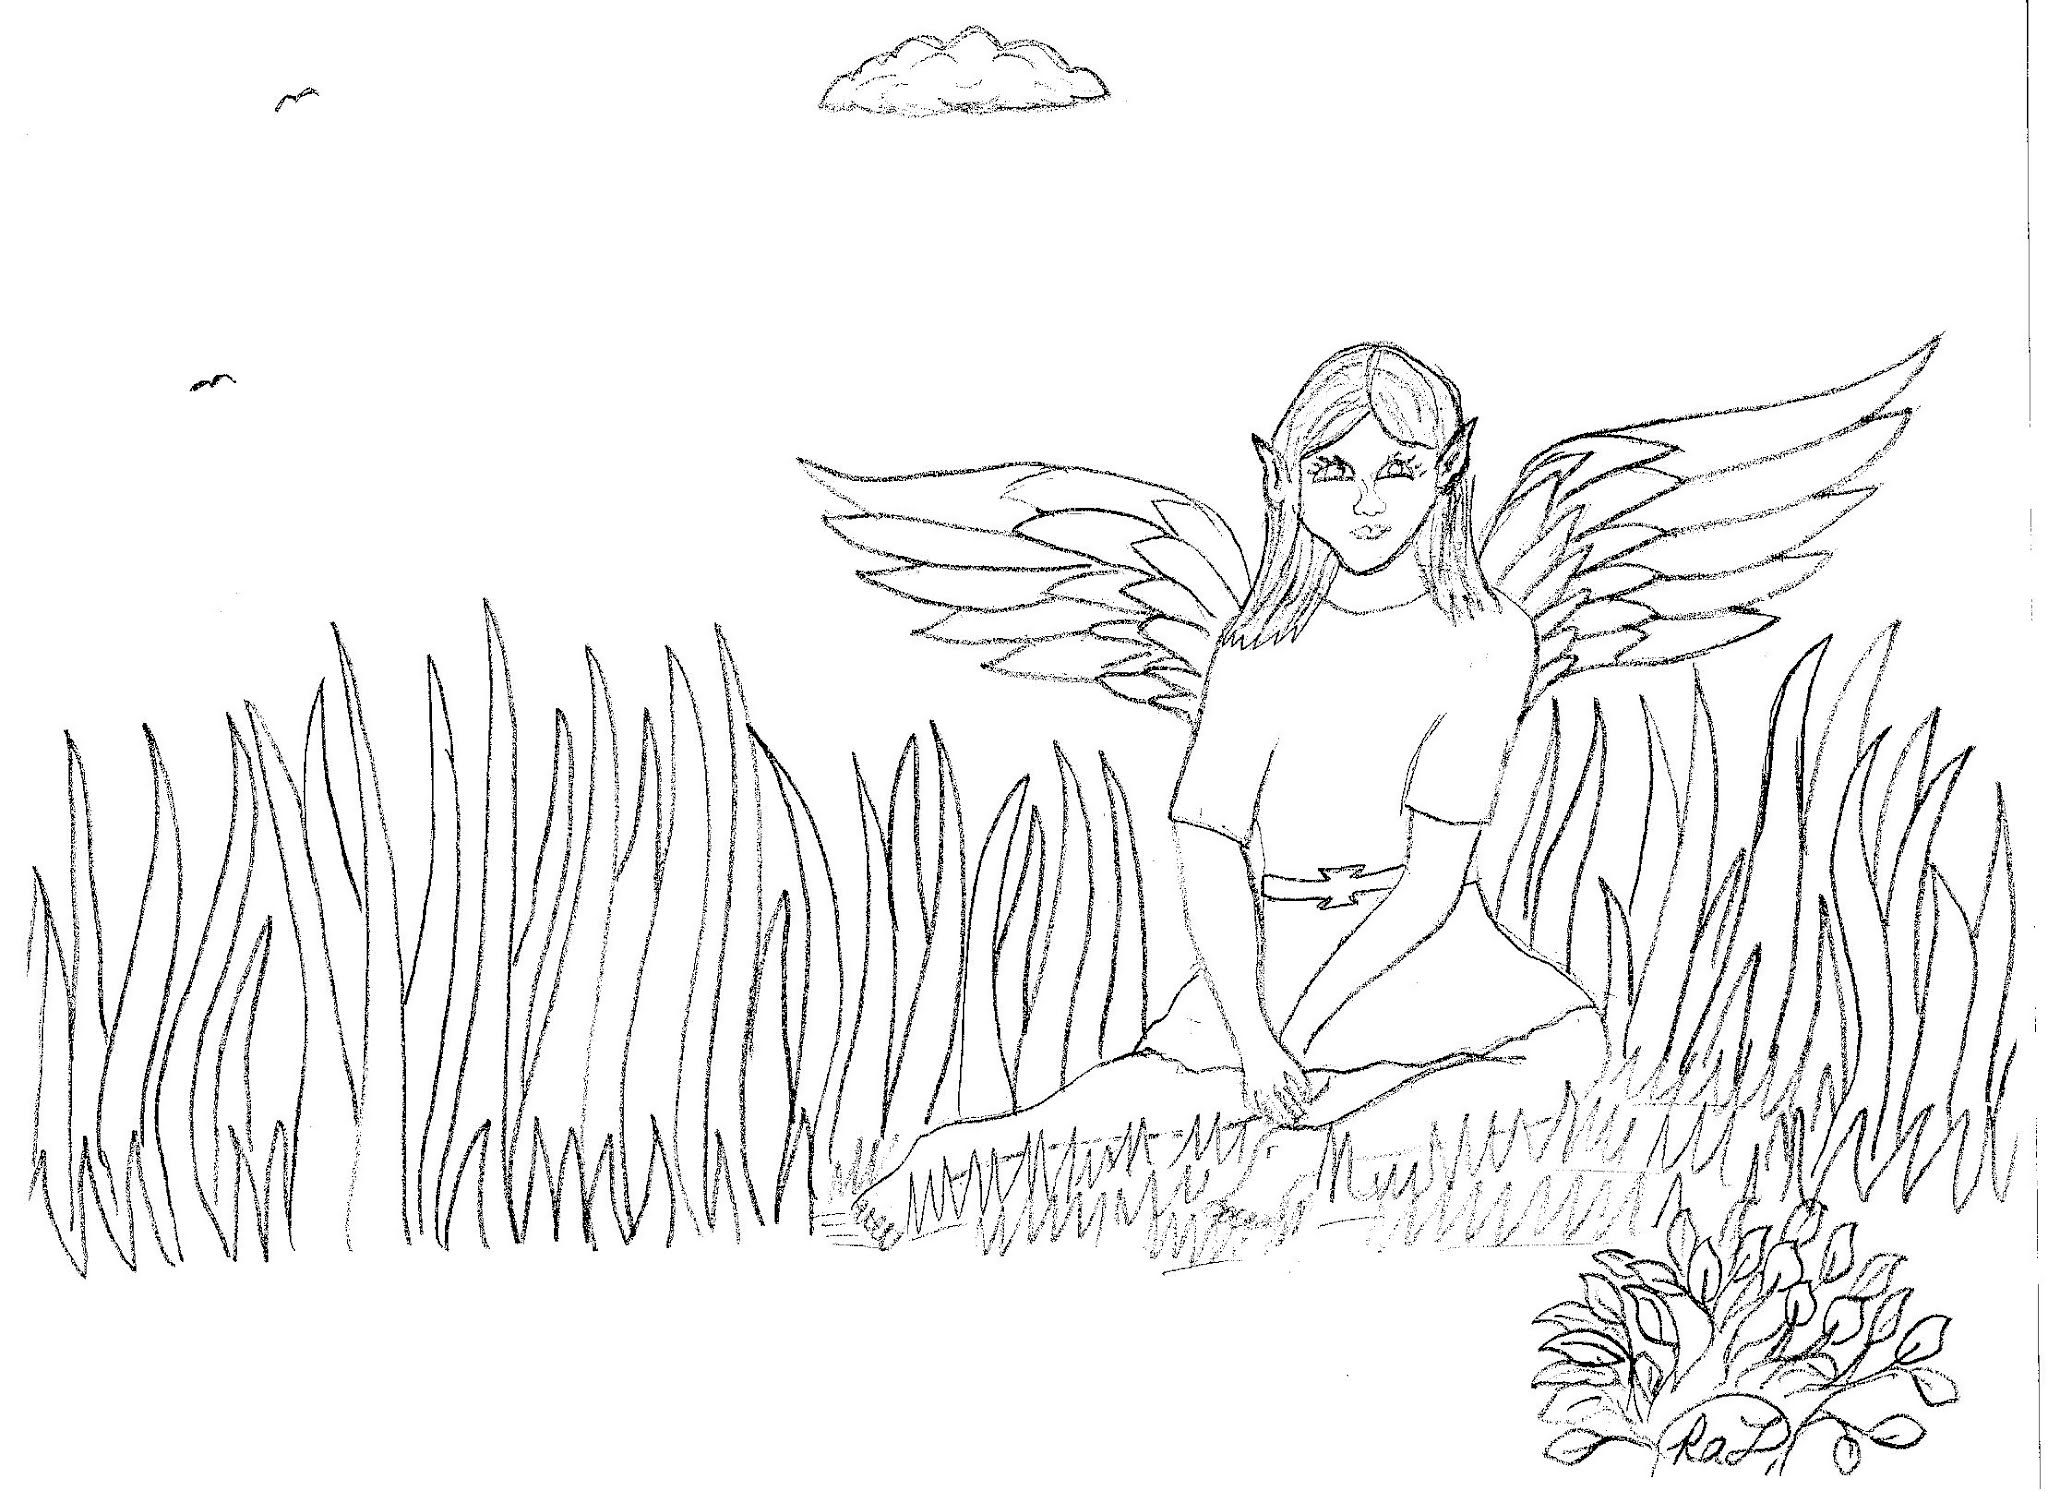 Robin's Great Coloring Pages: Butterfly Fairies and Bird Fairies coloring  pages